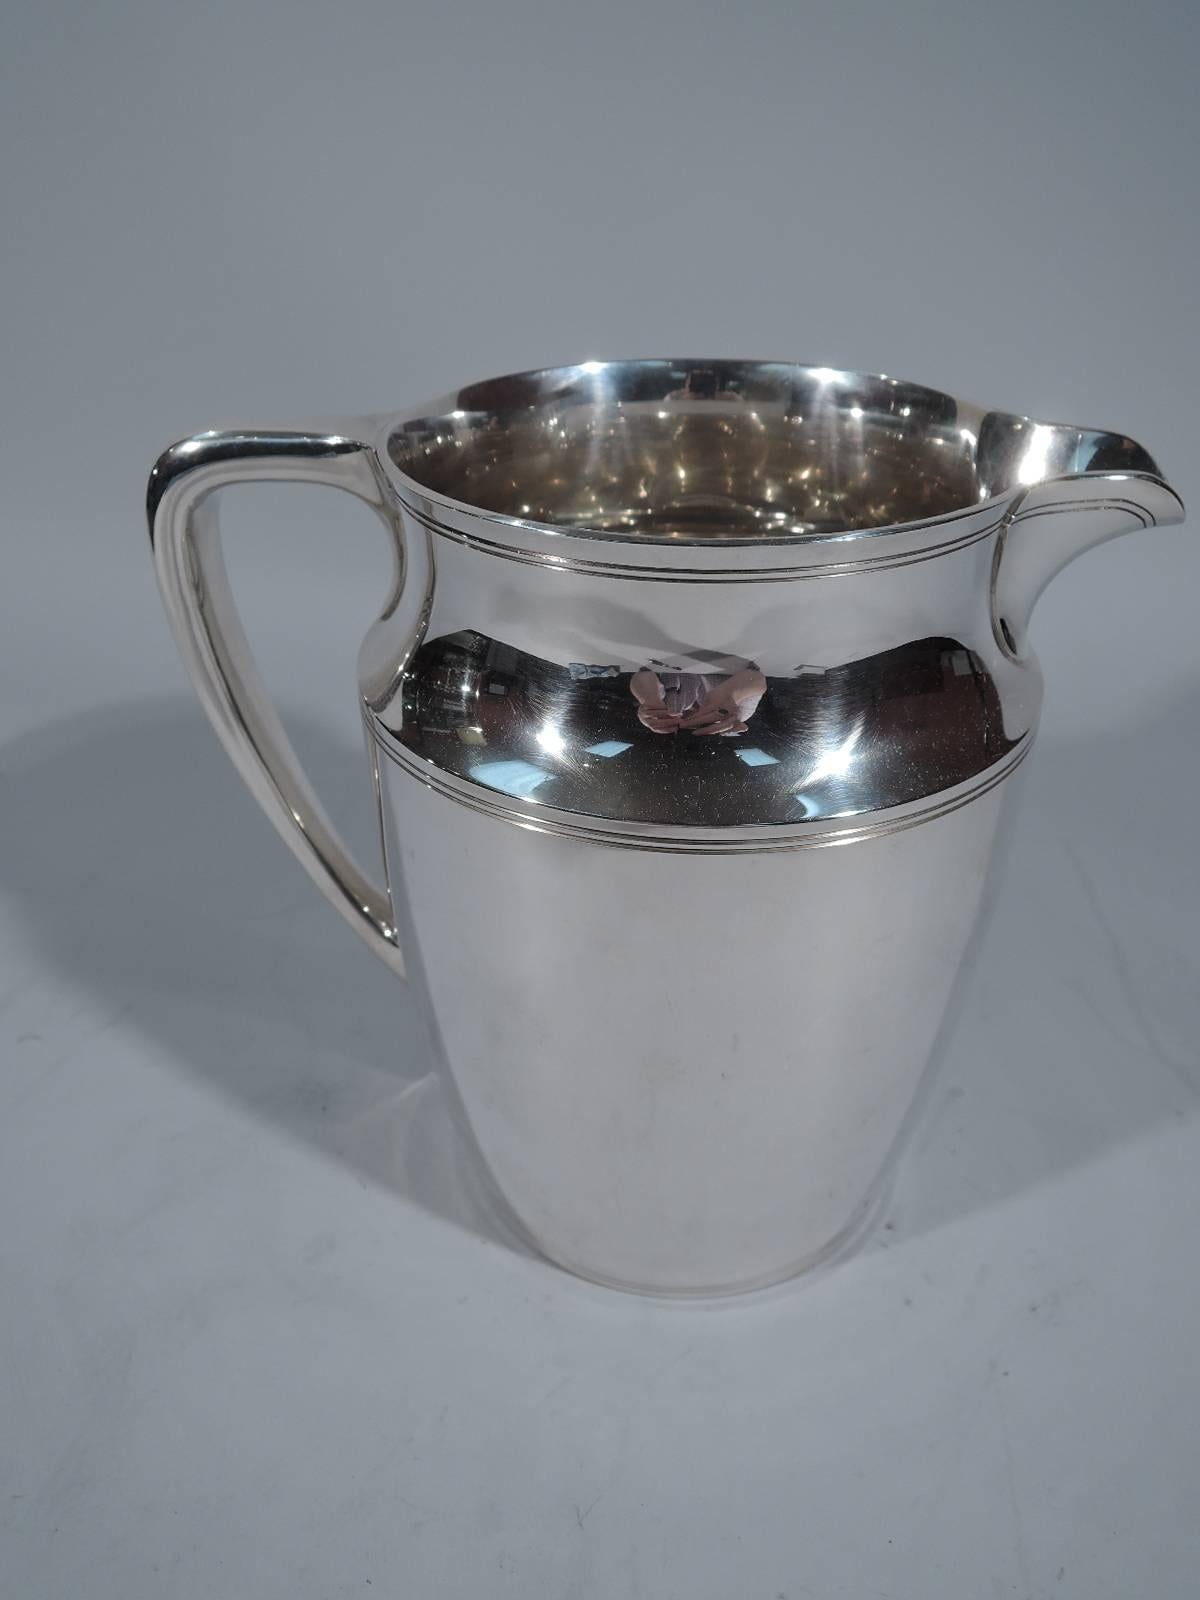 Sterling silver water pitcher. Made by Tiffany & Co. in New York. Gently curved and tapering sides, inset neck, and scroll bracket handle. Double linear bands incised at shoulder and rim. Holds 4 1/4 pints. Hallmark includes pattern no. 20211,